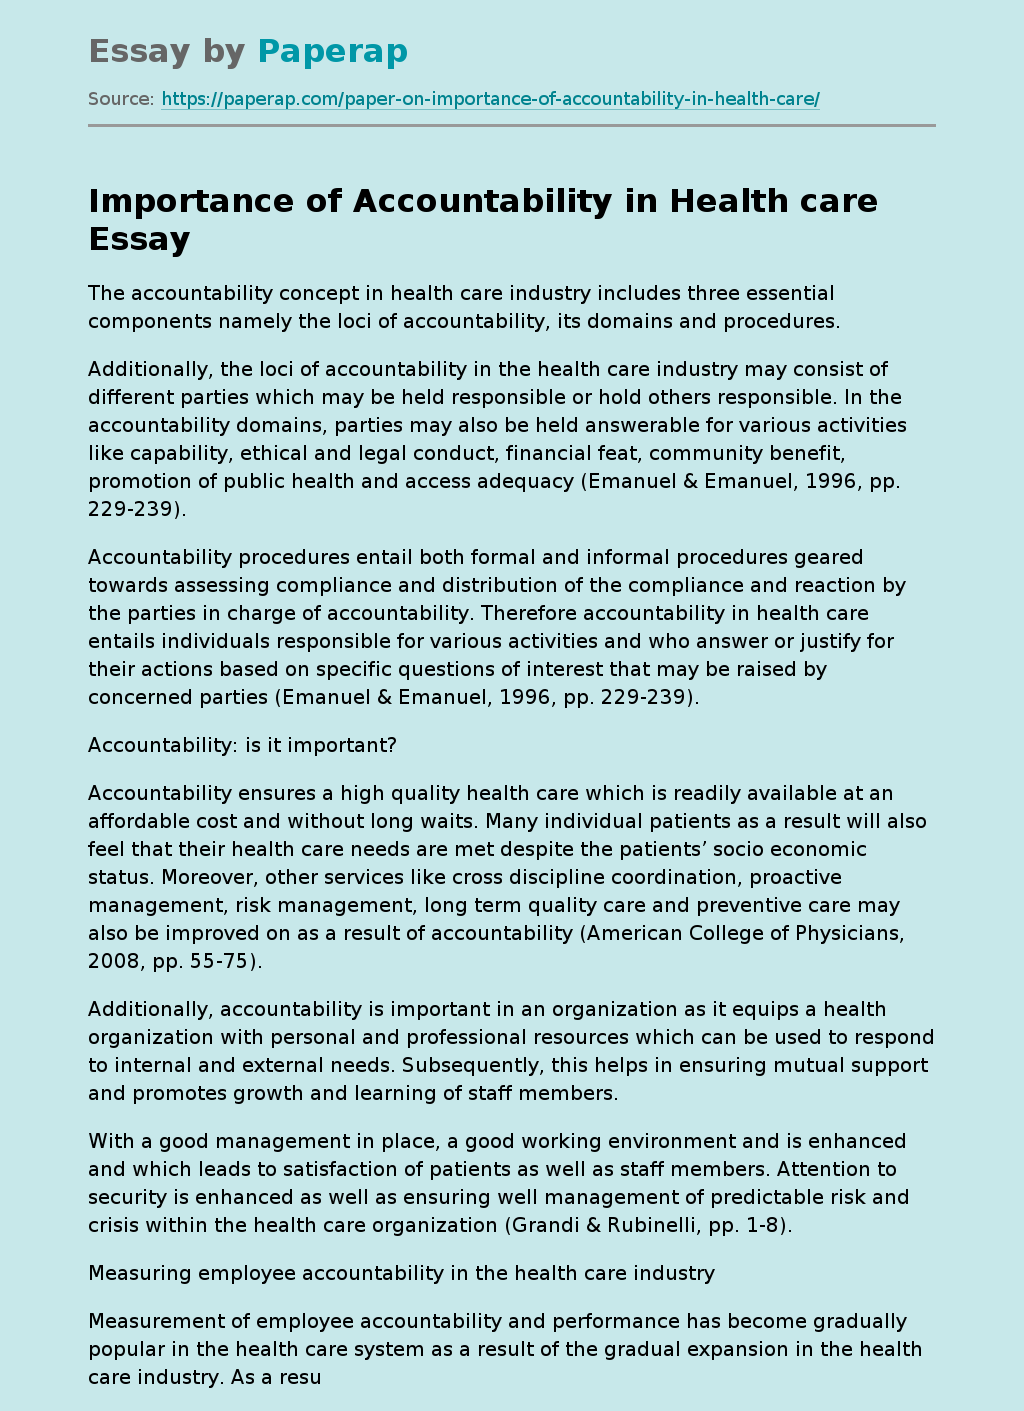 Importance of Accountability in Health care